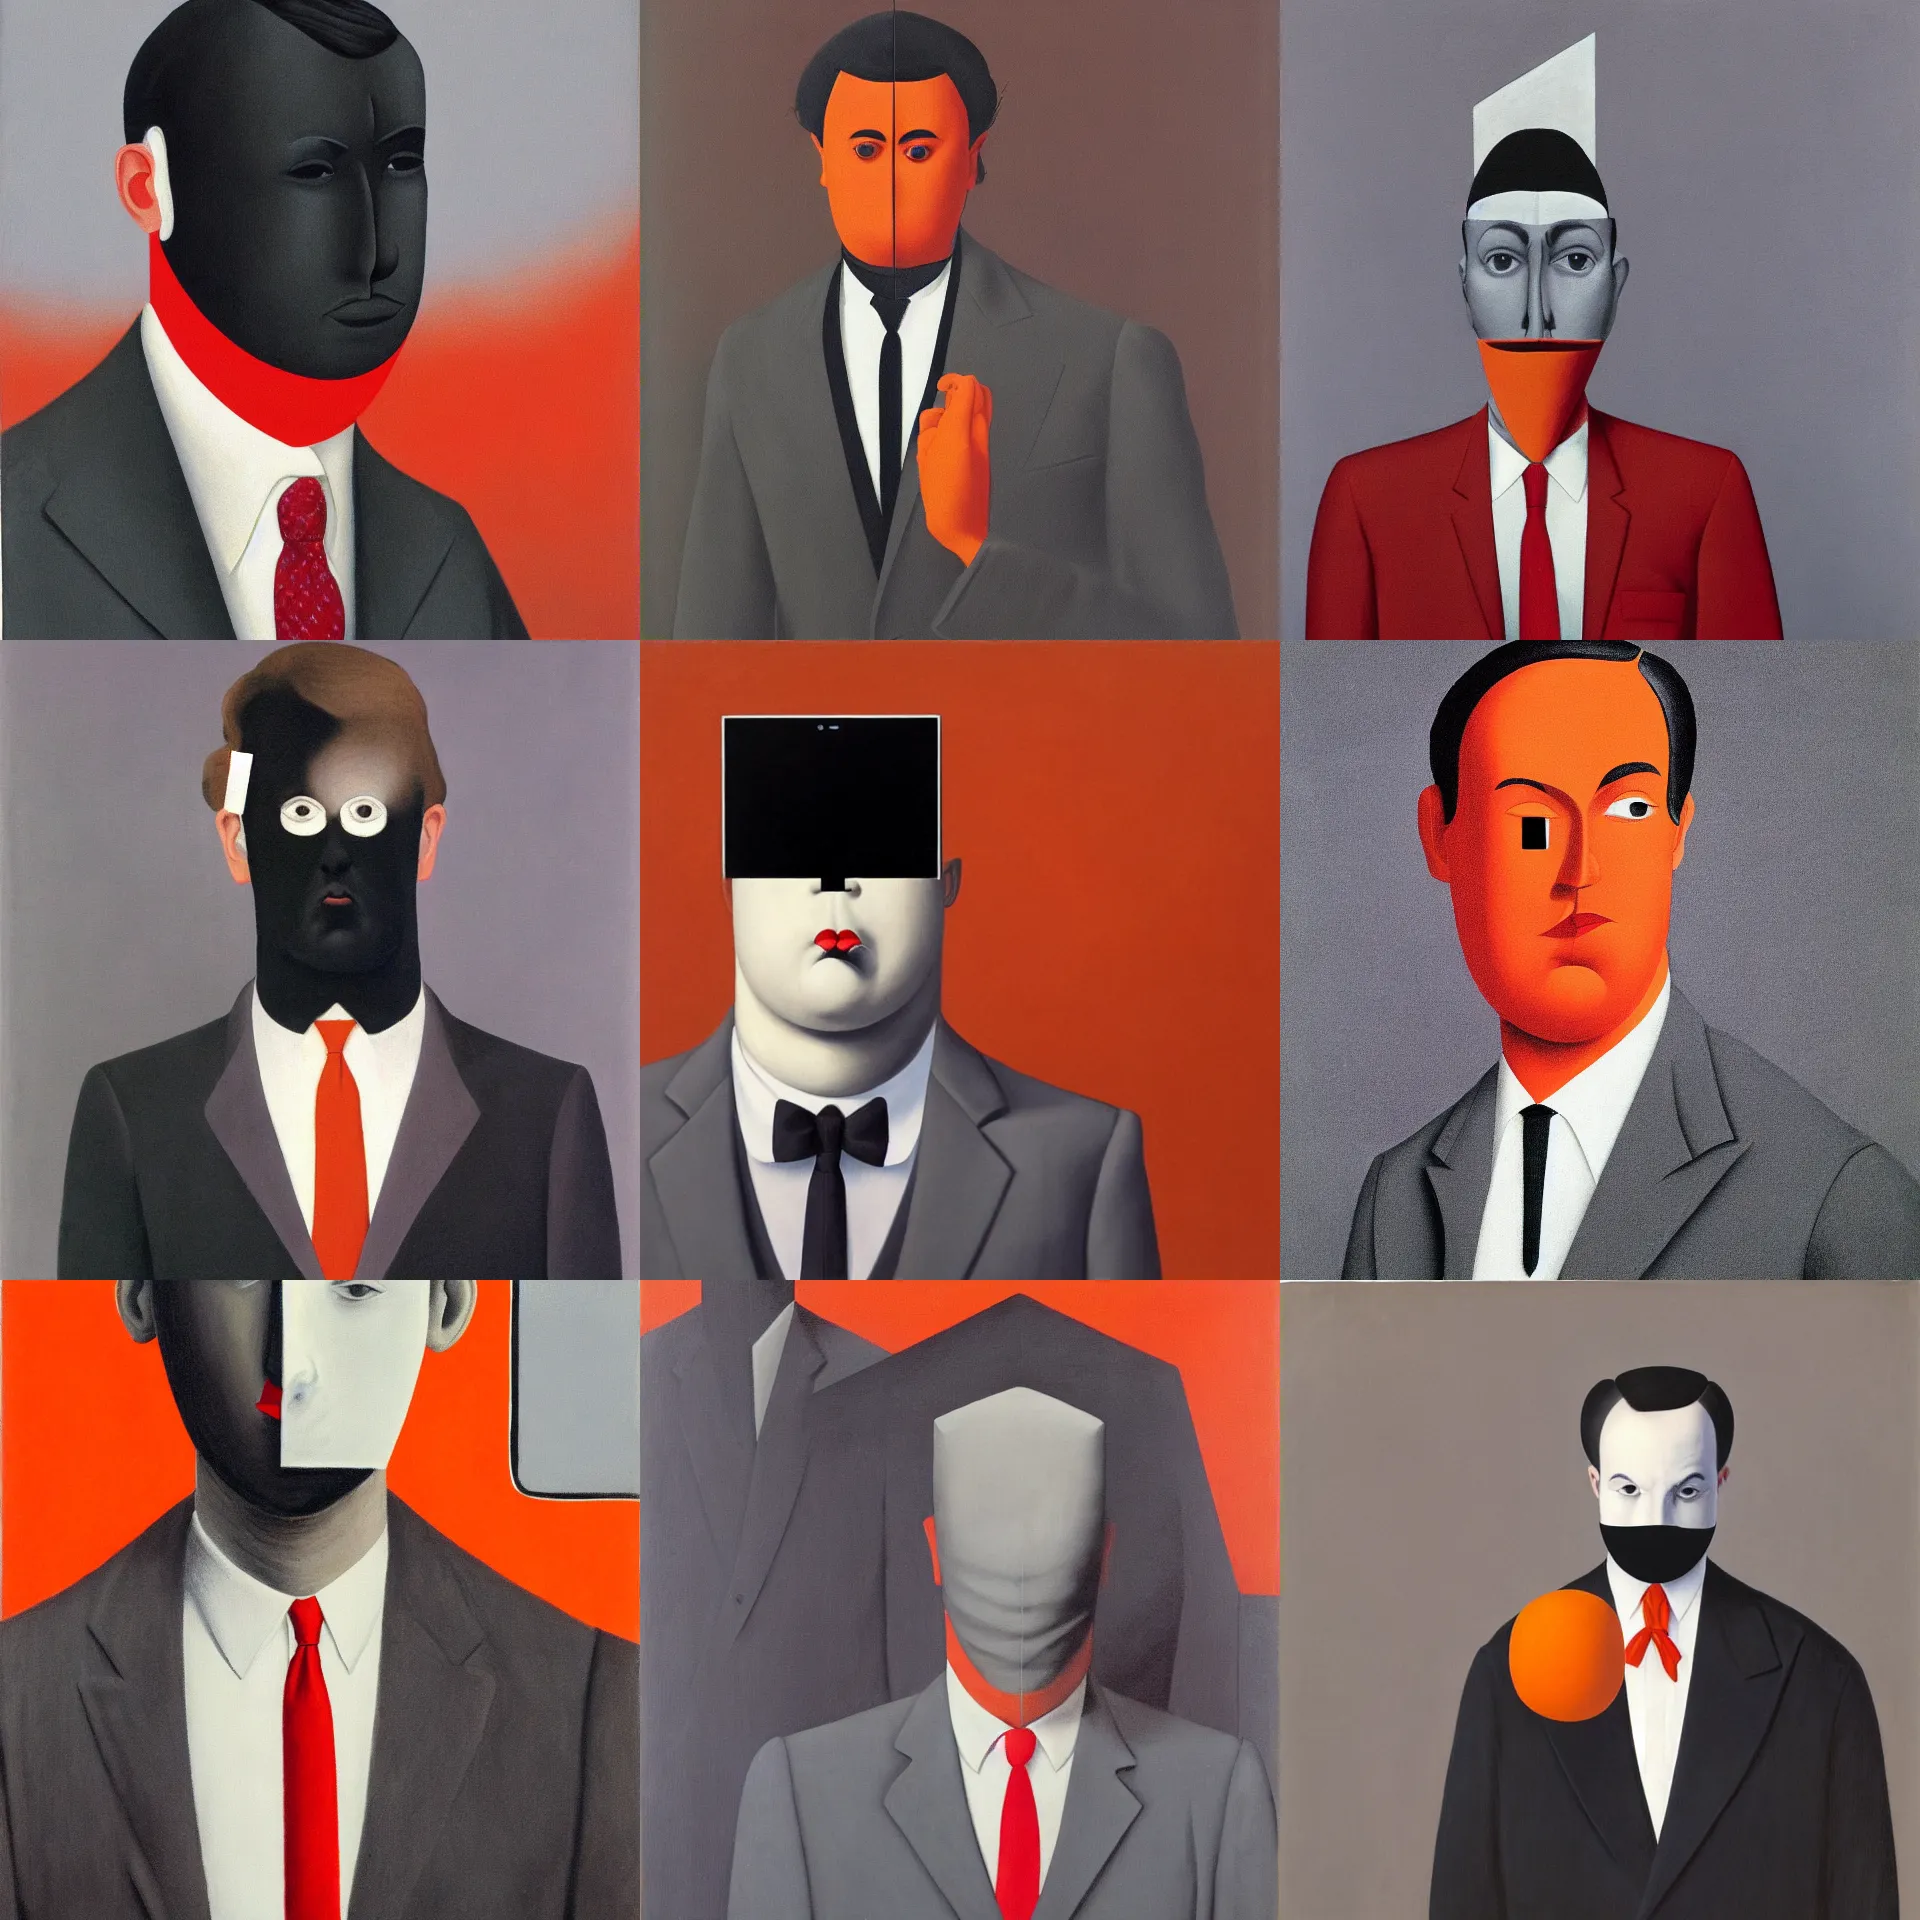 Prompt: front view portrait of a man with a phone replacing his face, wearing dark grey suit, white shirt, red tie, black pants, in front of an orange background, painted by rene magritte